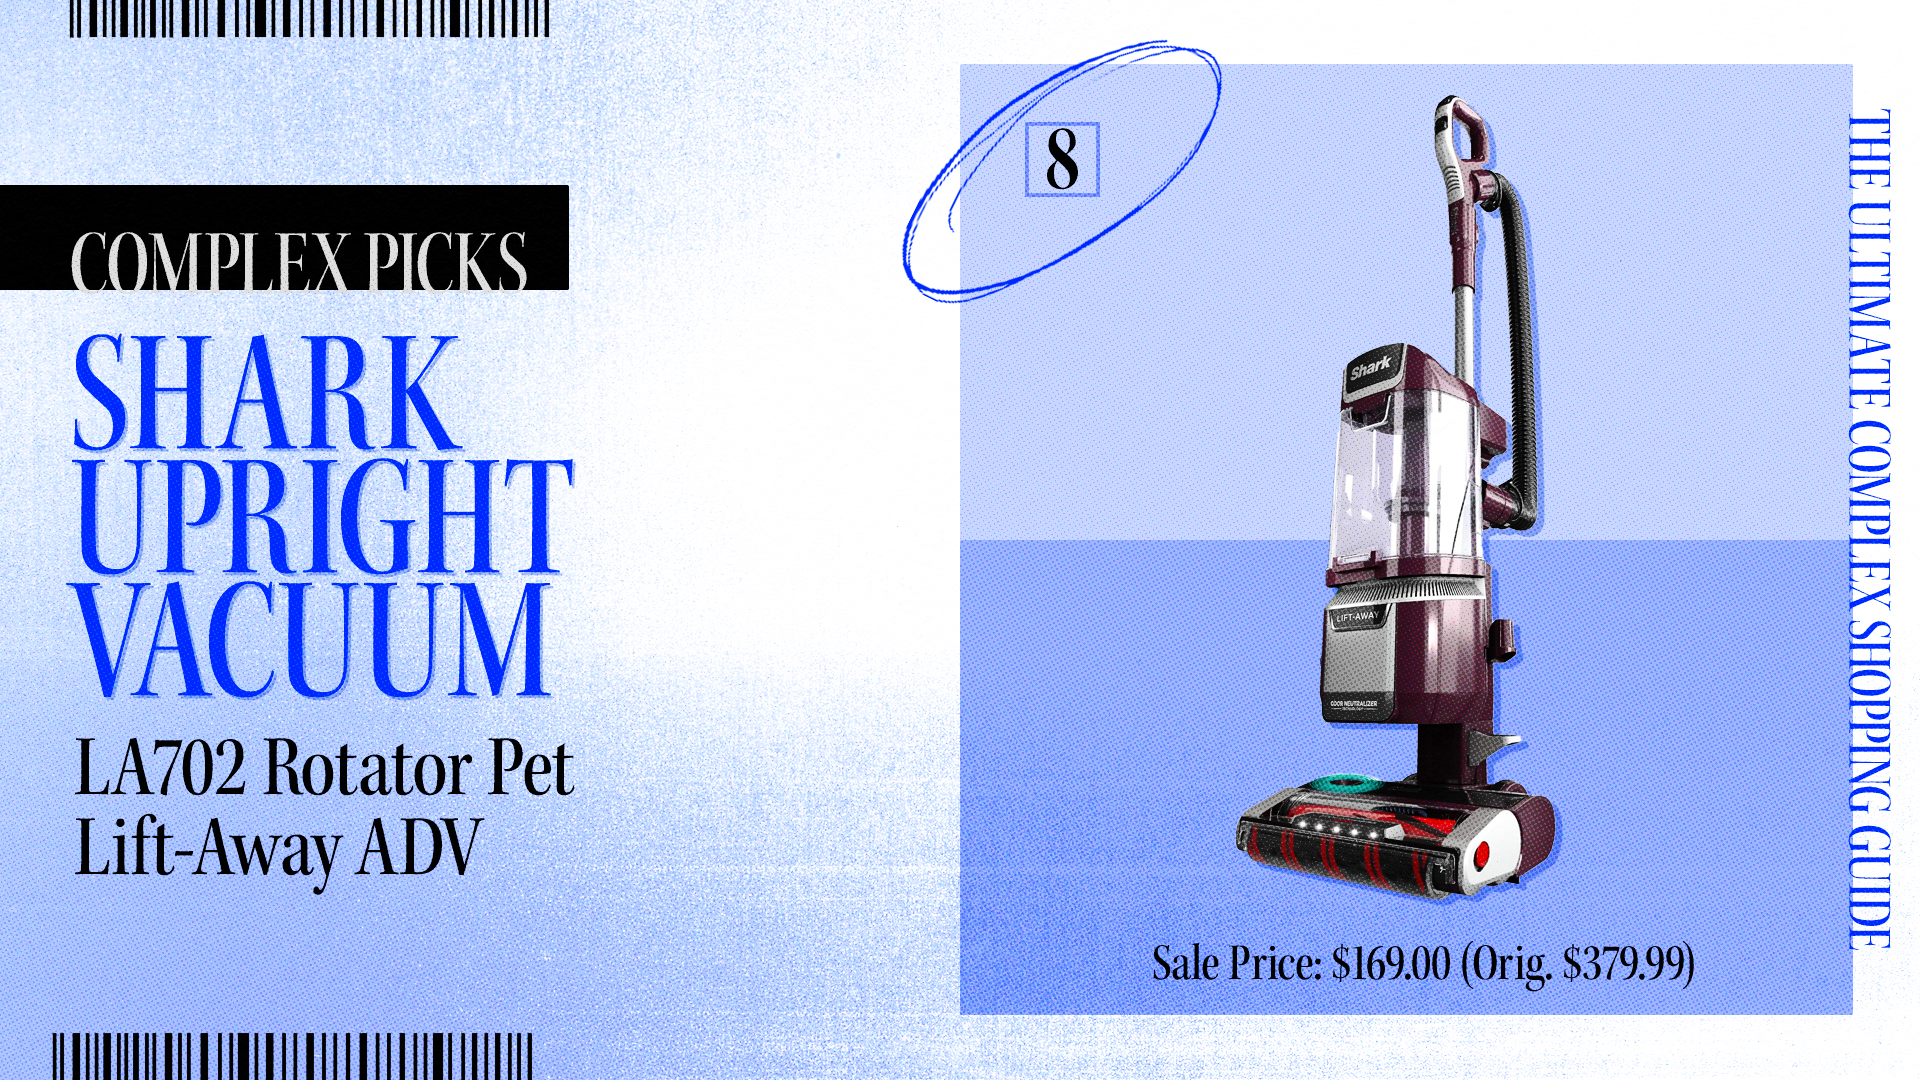 Advertisement for a Shark Upright Vacuum LA702 Rotator Pet Lift-Away ADV, listing a sale price of $169.00, originally $379.99. Part of a shopping guide